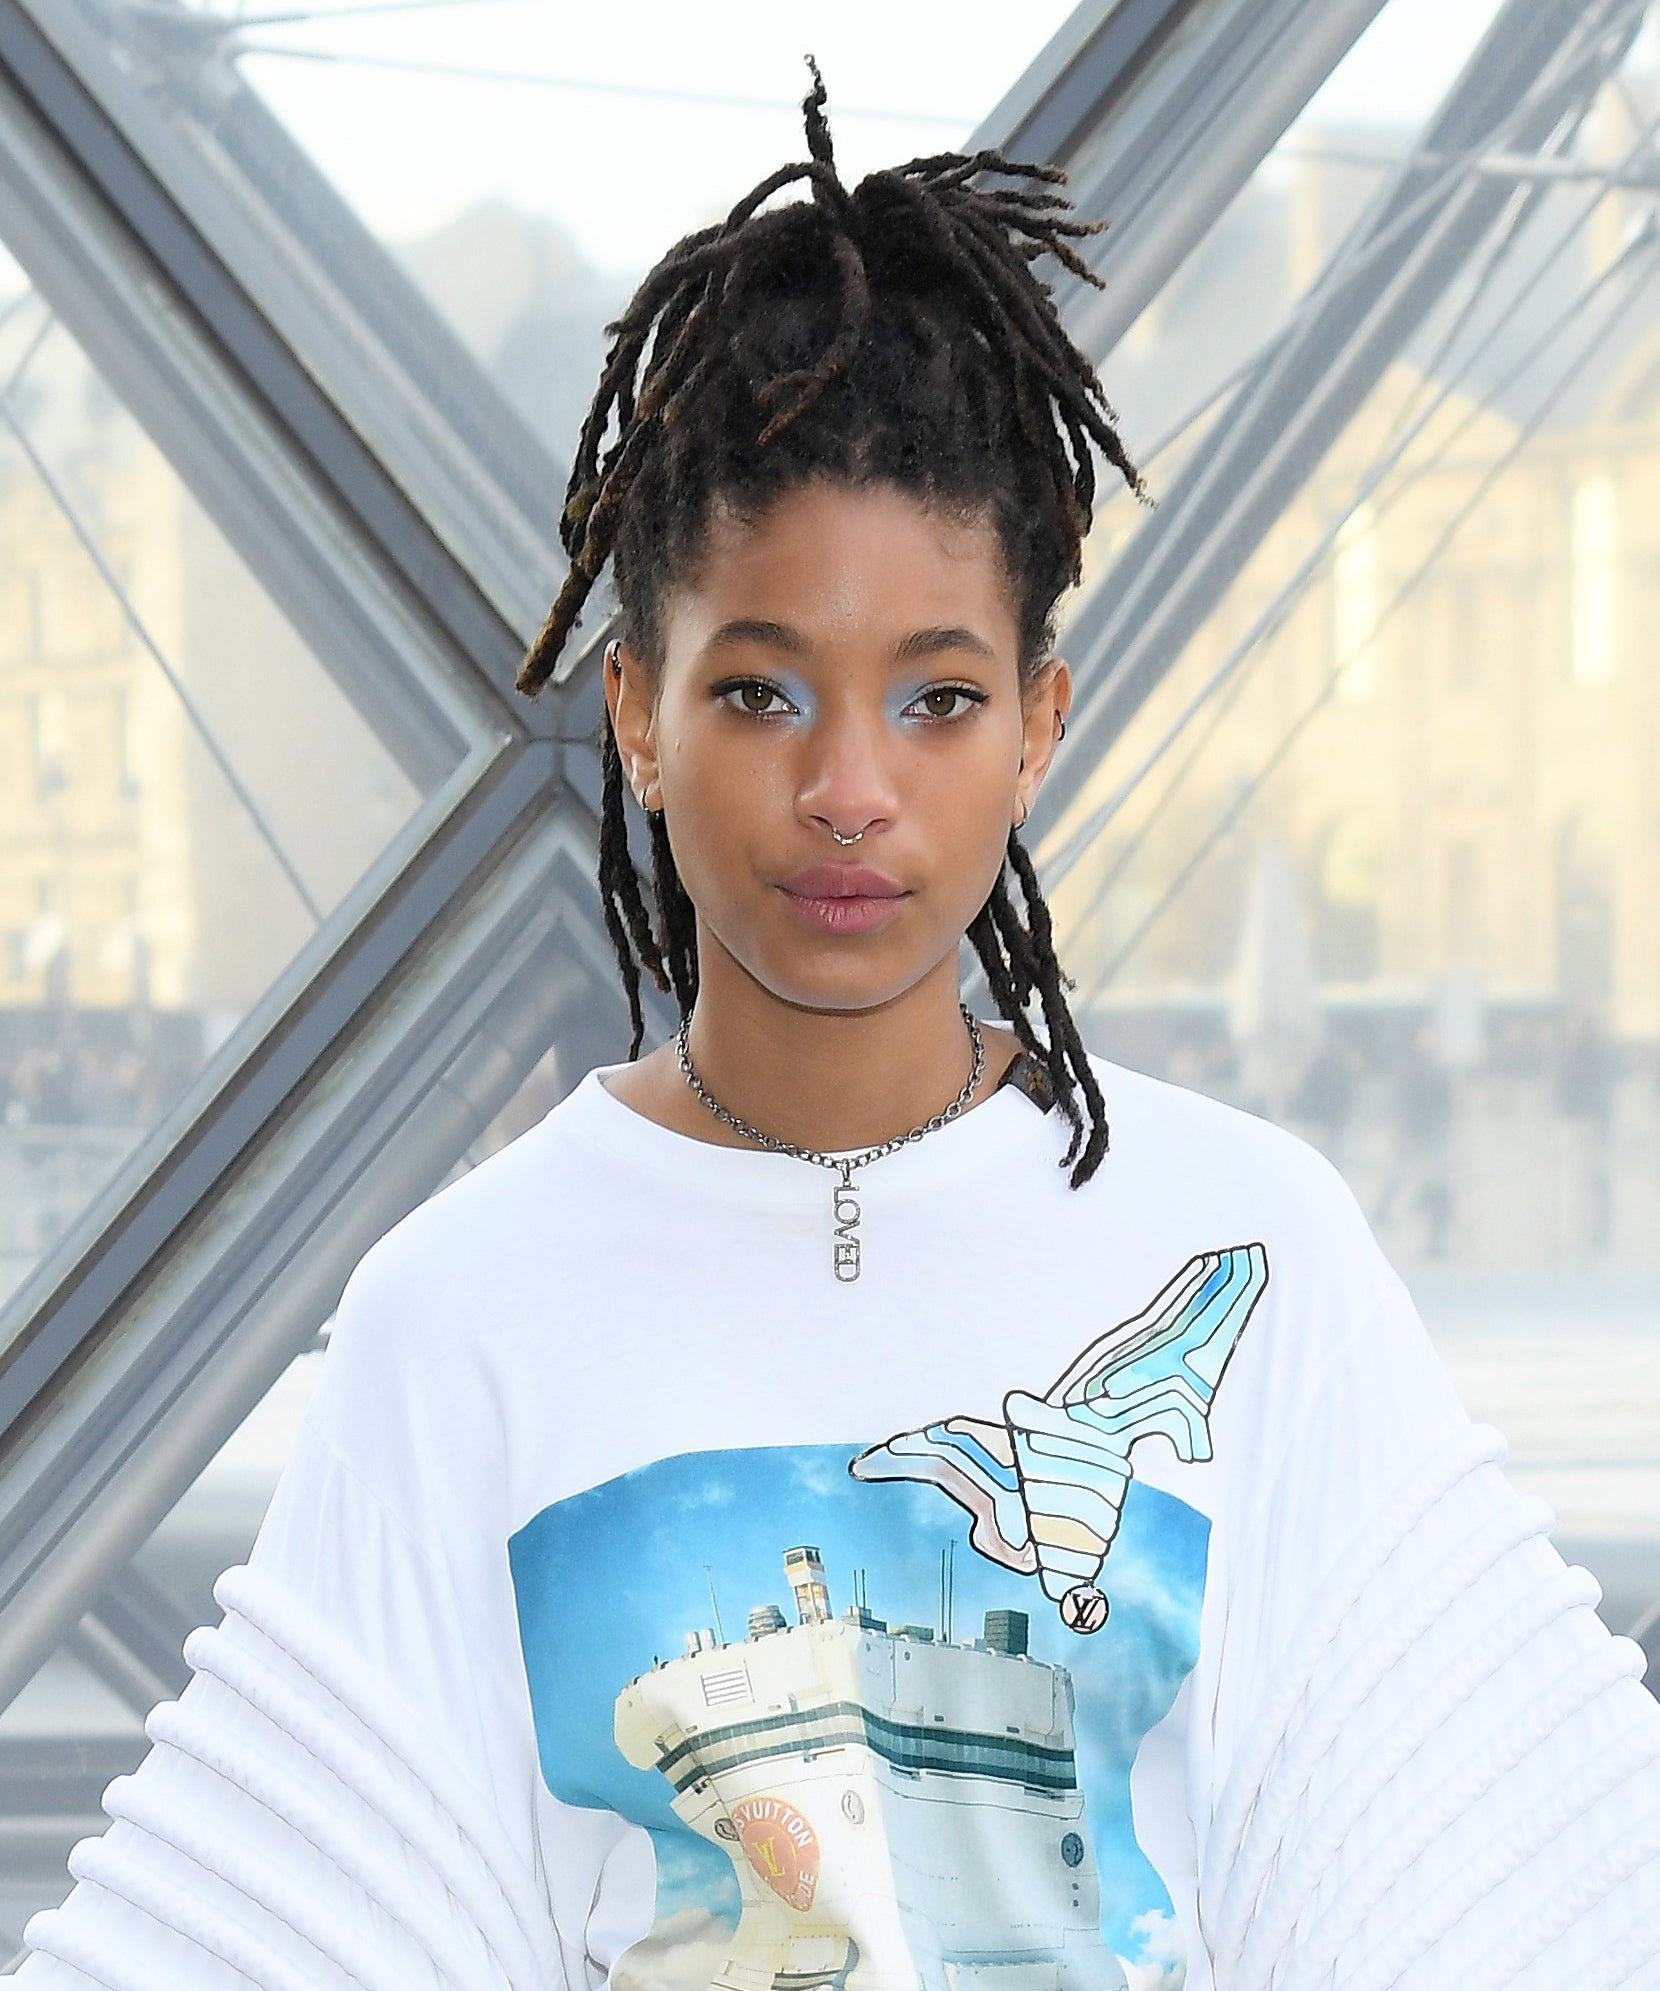 HD wallpaper, Samsung Hd Willow Smith Background Photo, 1660X2000 Hd Phone, Willow Smith, Head Shaved Live